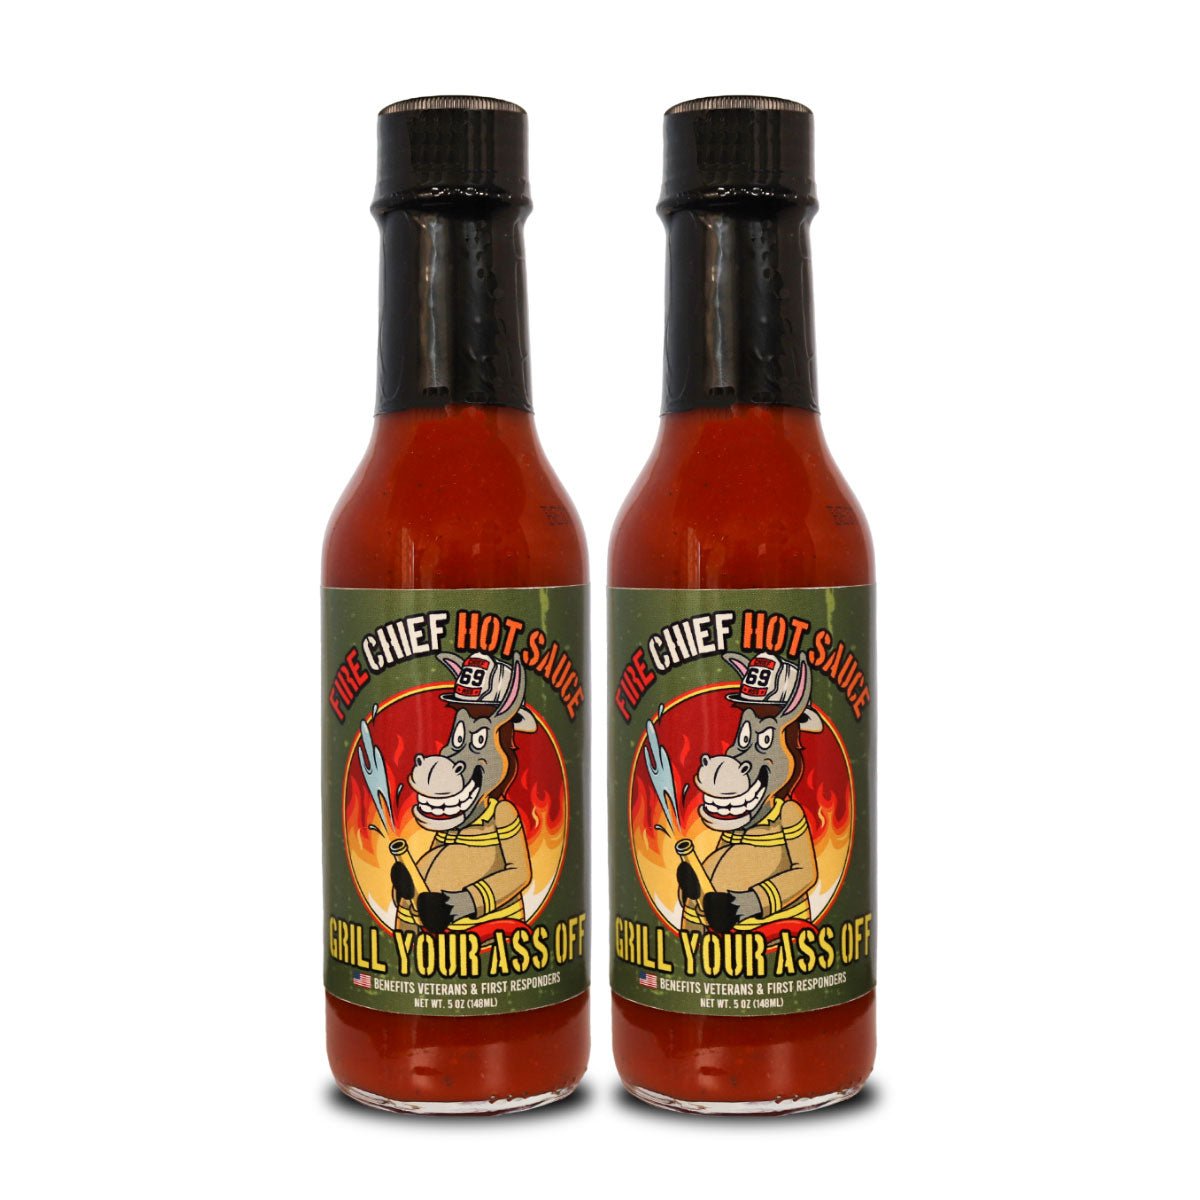 FIRE CHIEF HOT SAUCE 2 PACK - Grill Your Ass Off